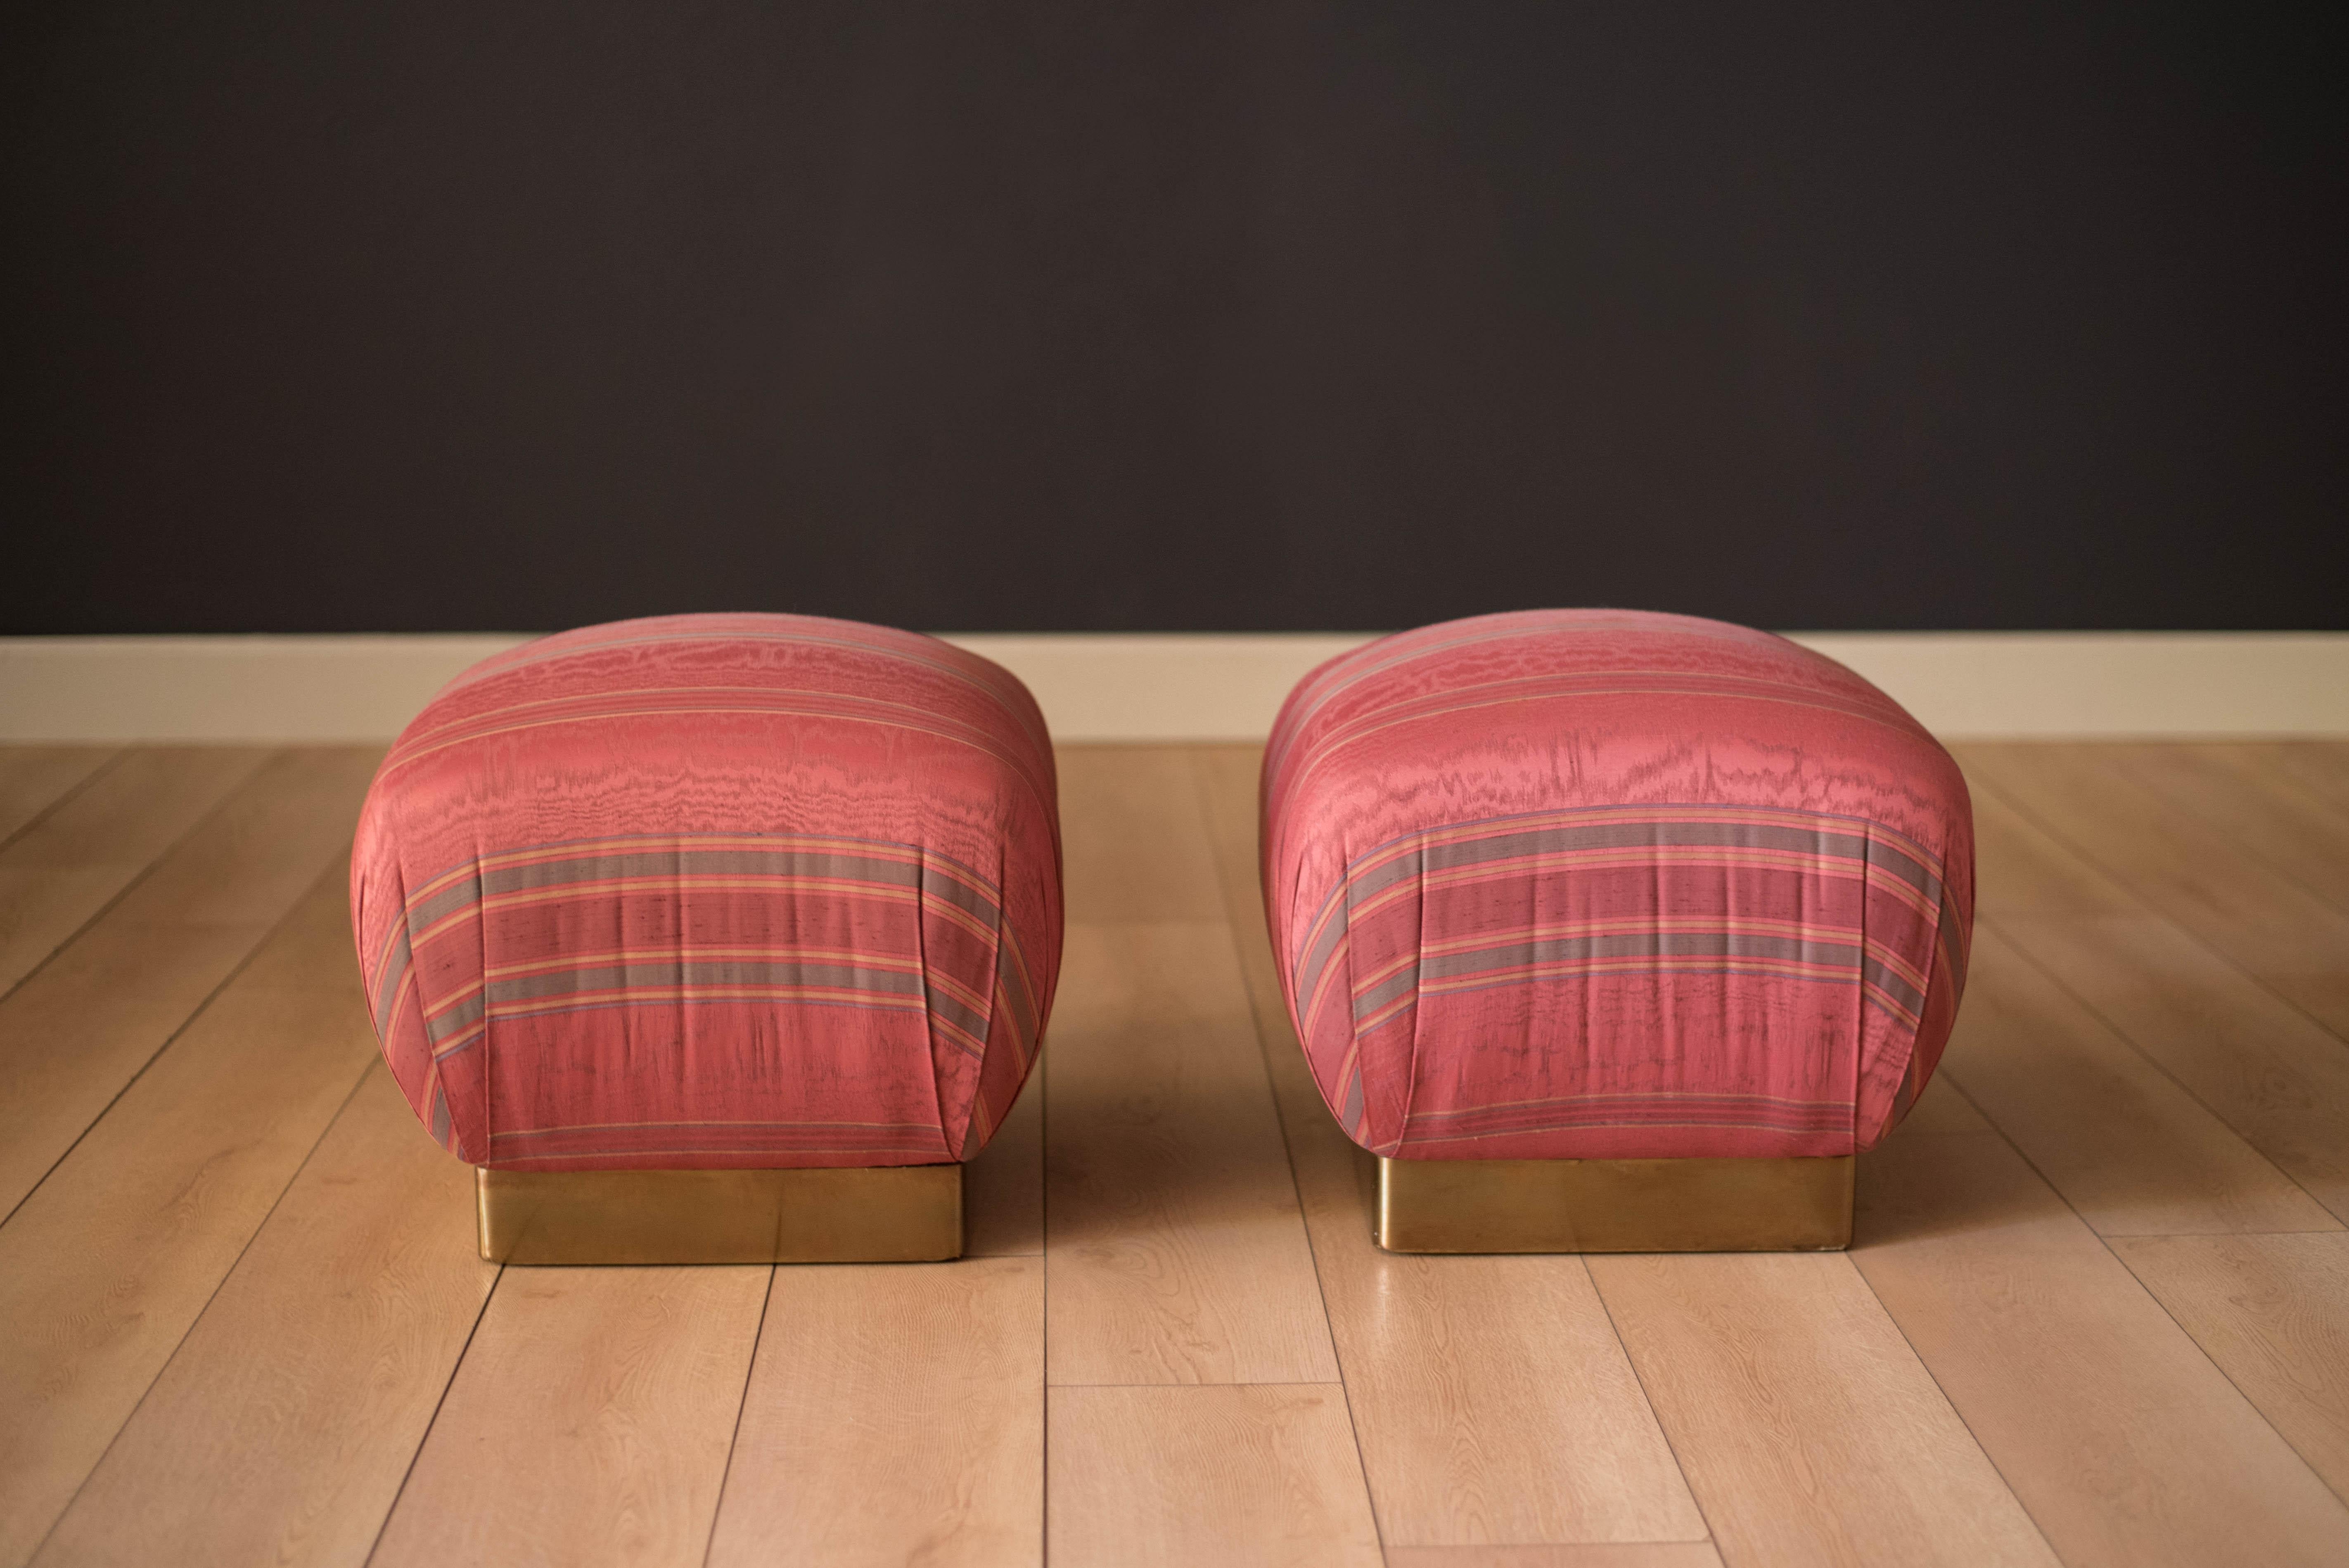 California modern designed pair of vintage lounge ottoman poufs by Marge Carson, circa 1970s. This inviting set provides a comfortable seat with a supportive firm cushion. The base is accented with brass trim that displays nicely aged patina. The